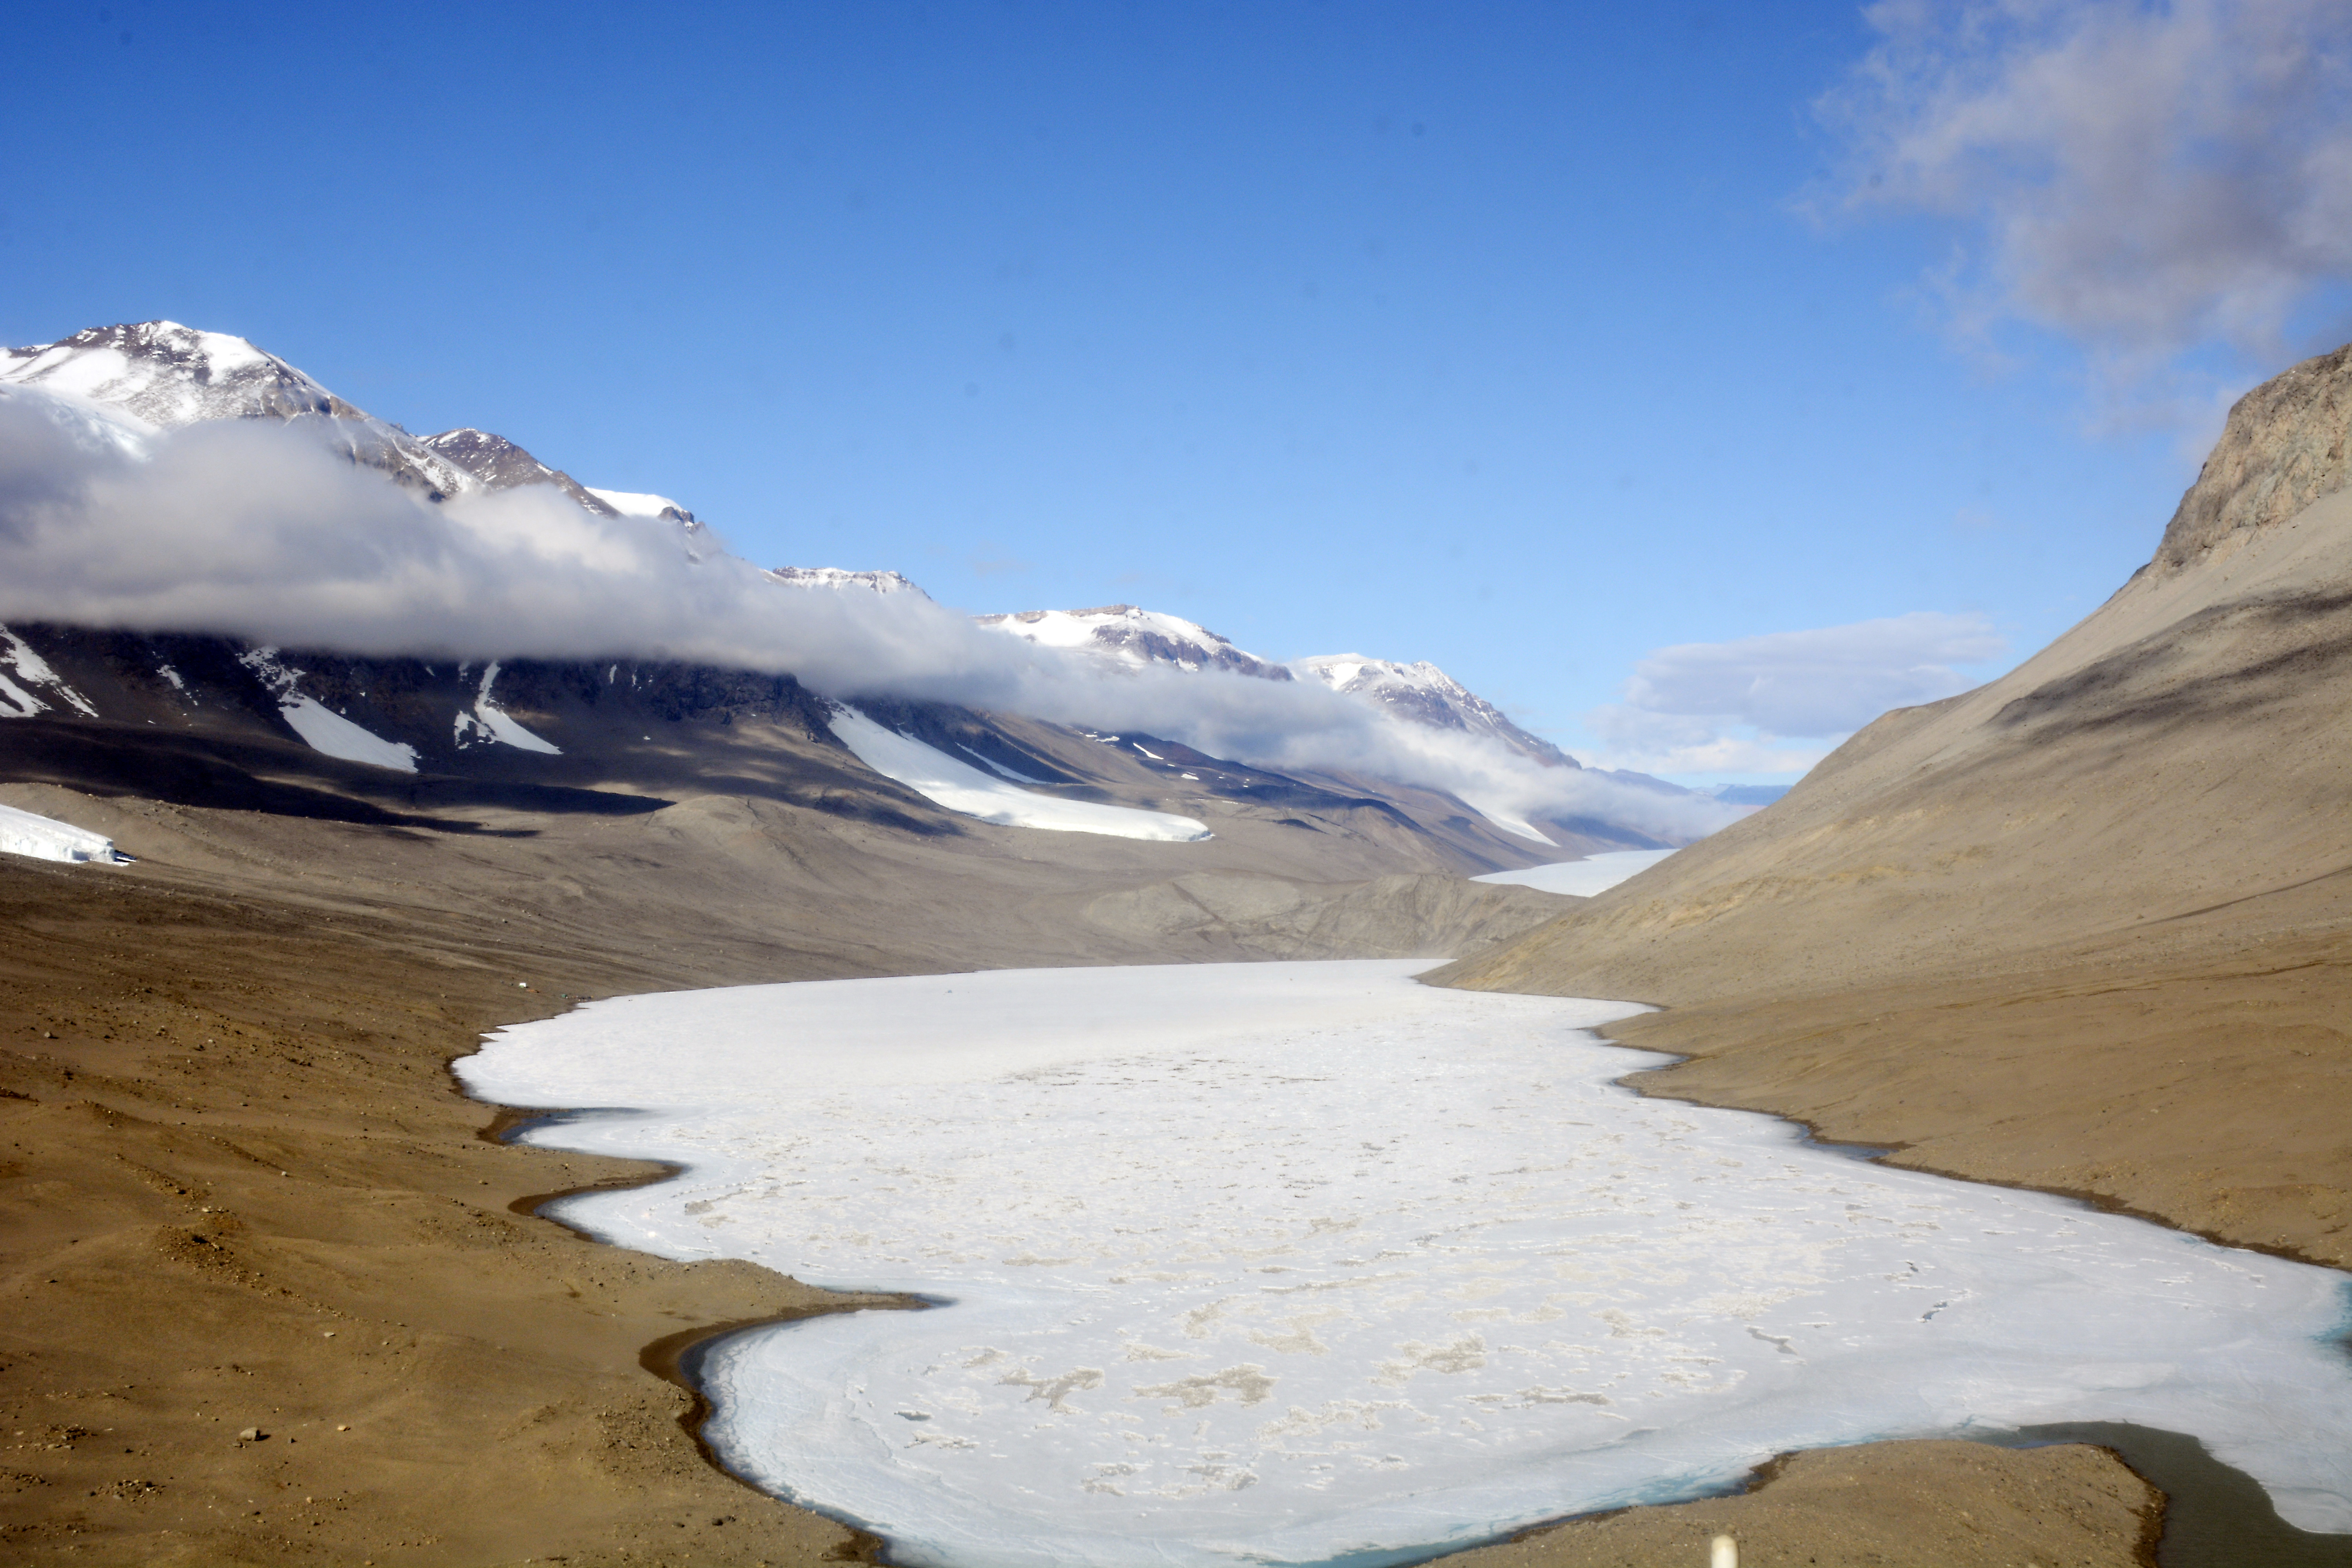 An ice-covered lake sits in a barren valley.